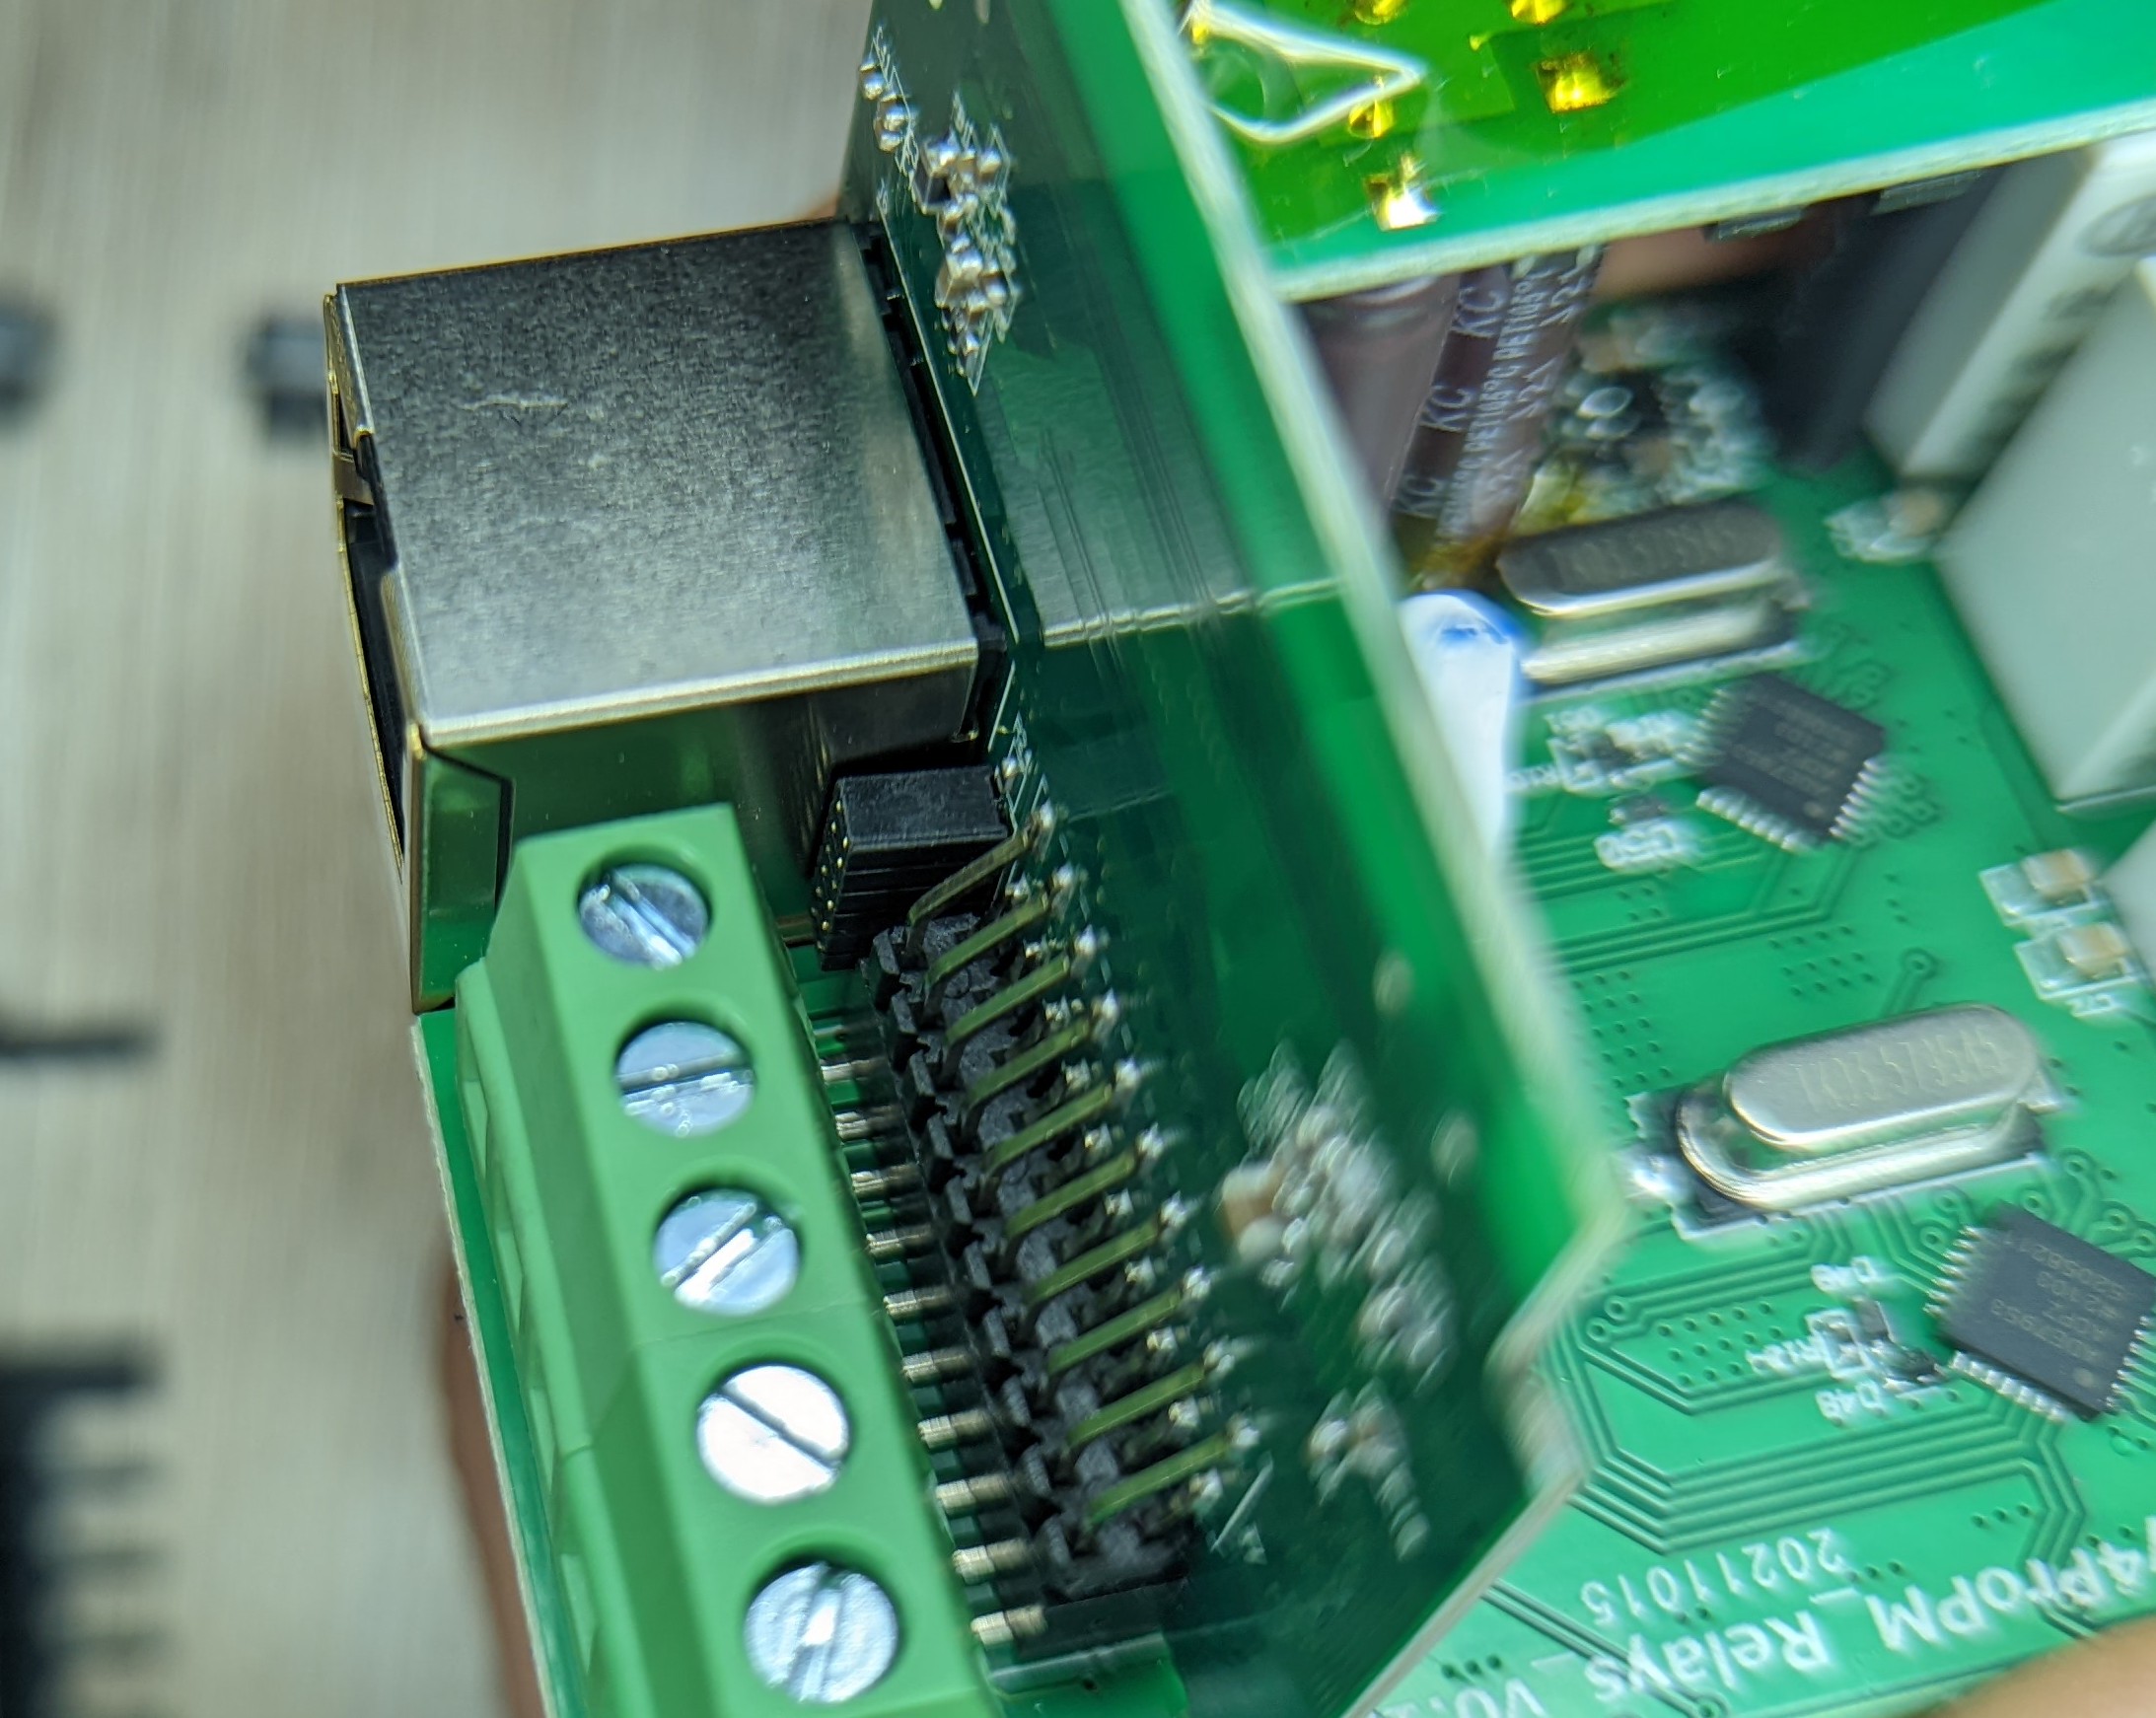 Picture showing what appears to be a debug connector next to the ethernet jack.